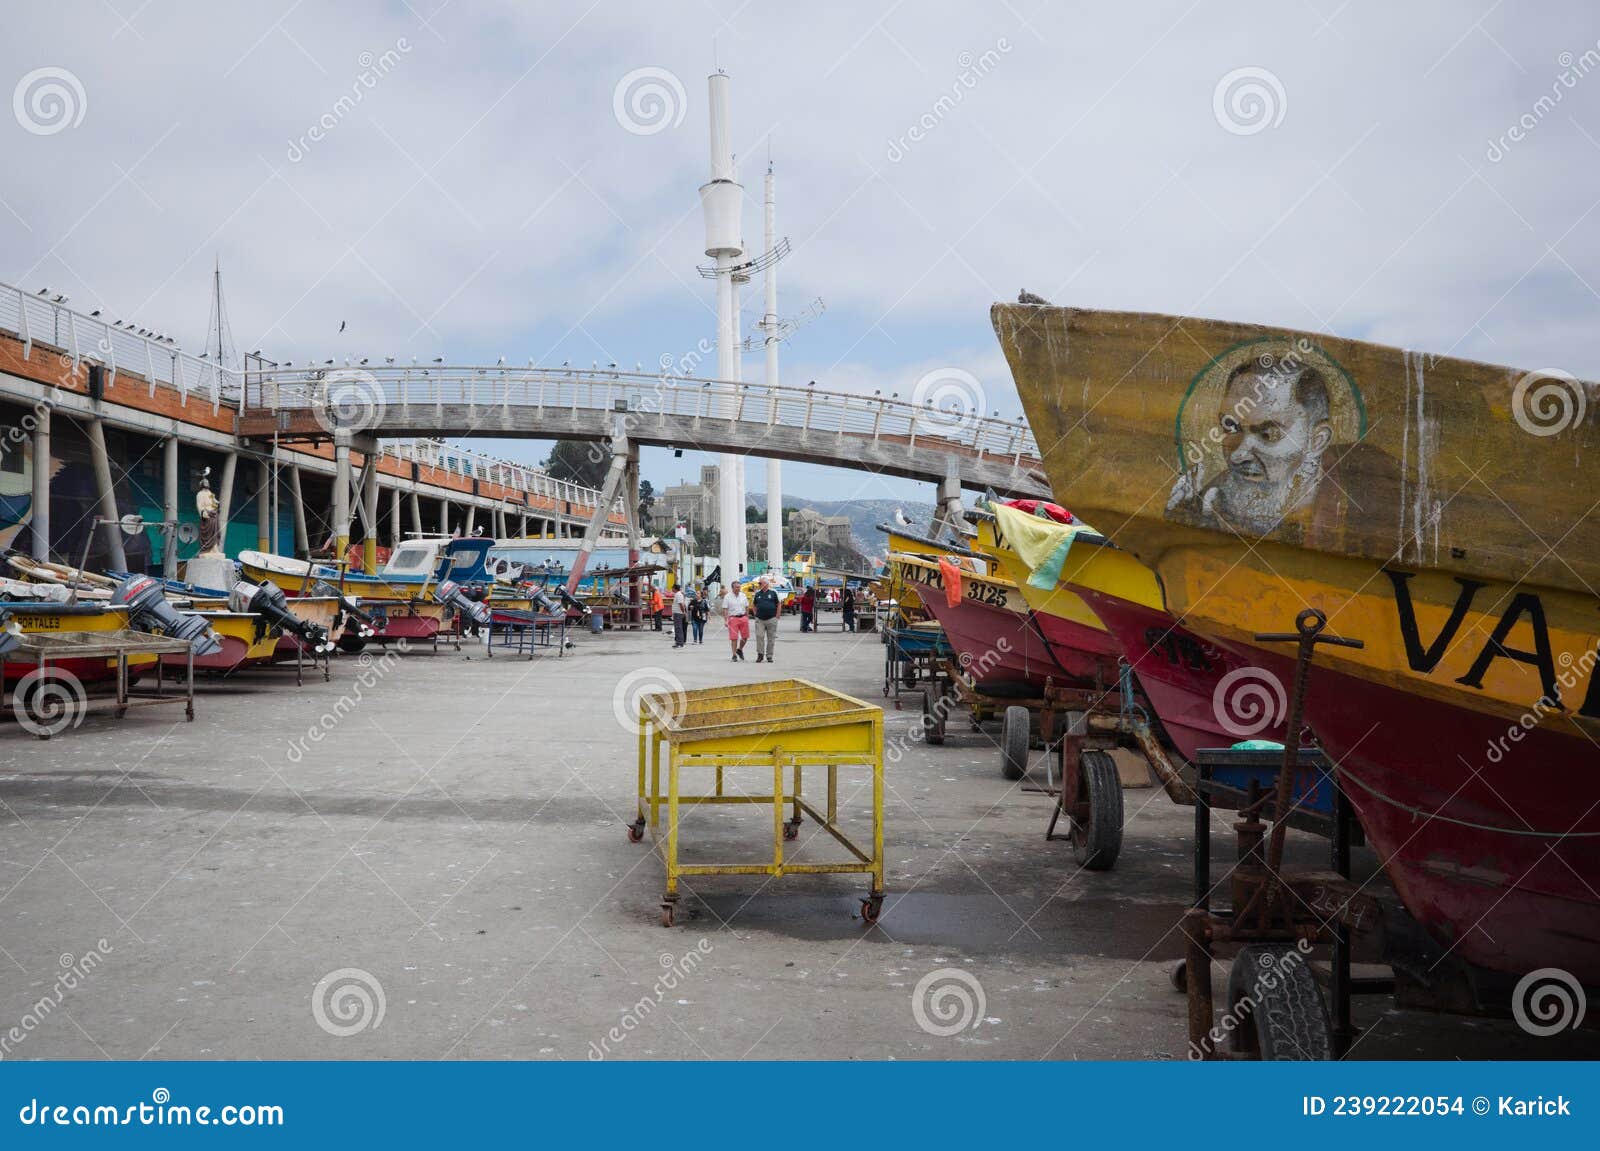 https://thumbs.dreamstime.com/z/valparaiso-chile-february-motorboats-parked-near-fish-market-small-fishing-boats-motor-carriages-portrait-saint-man-239222054.jpg